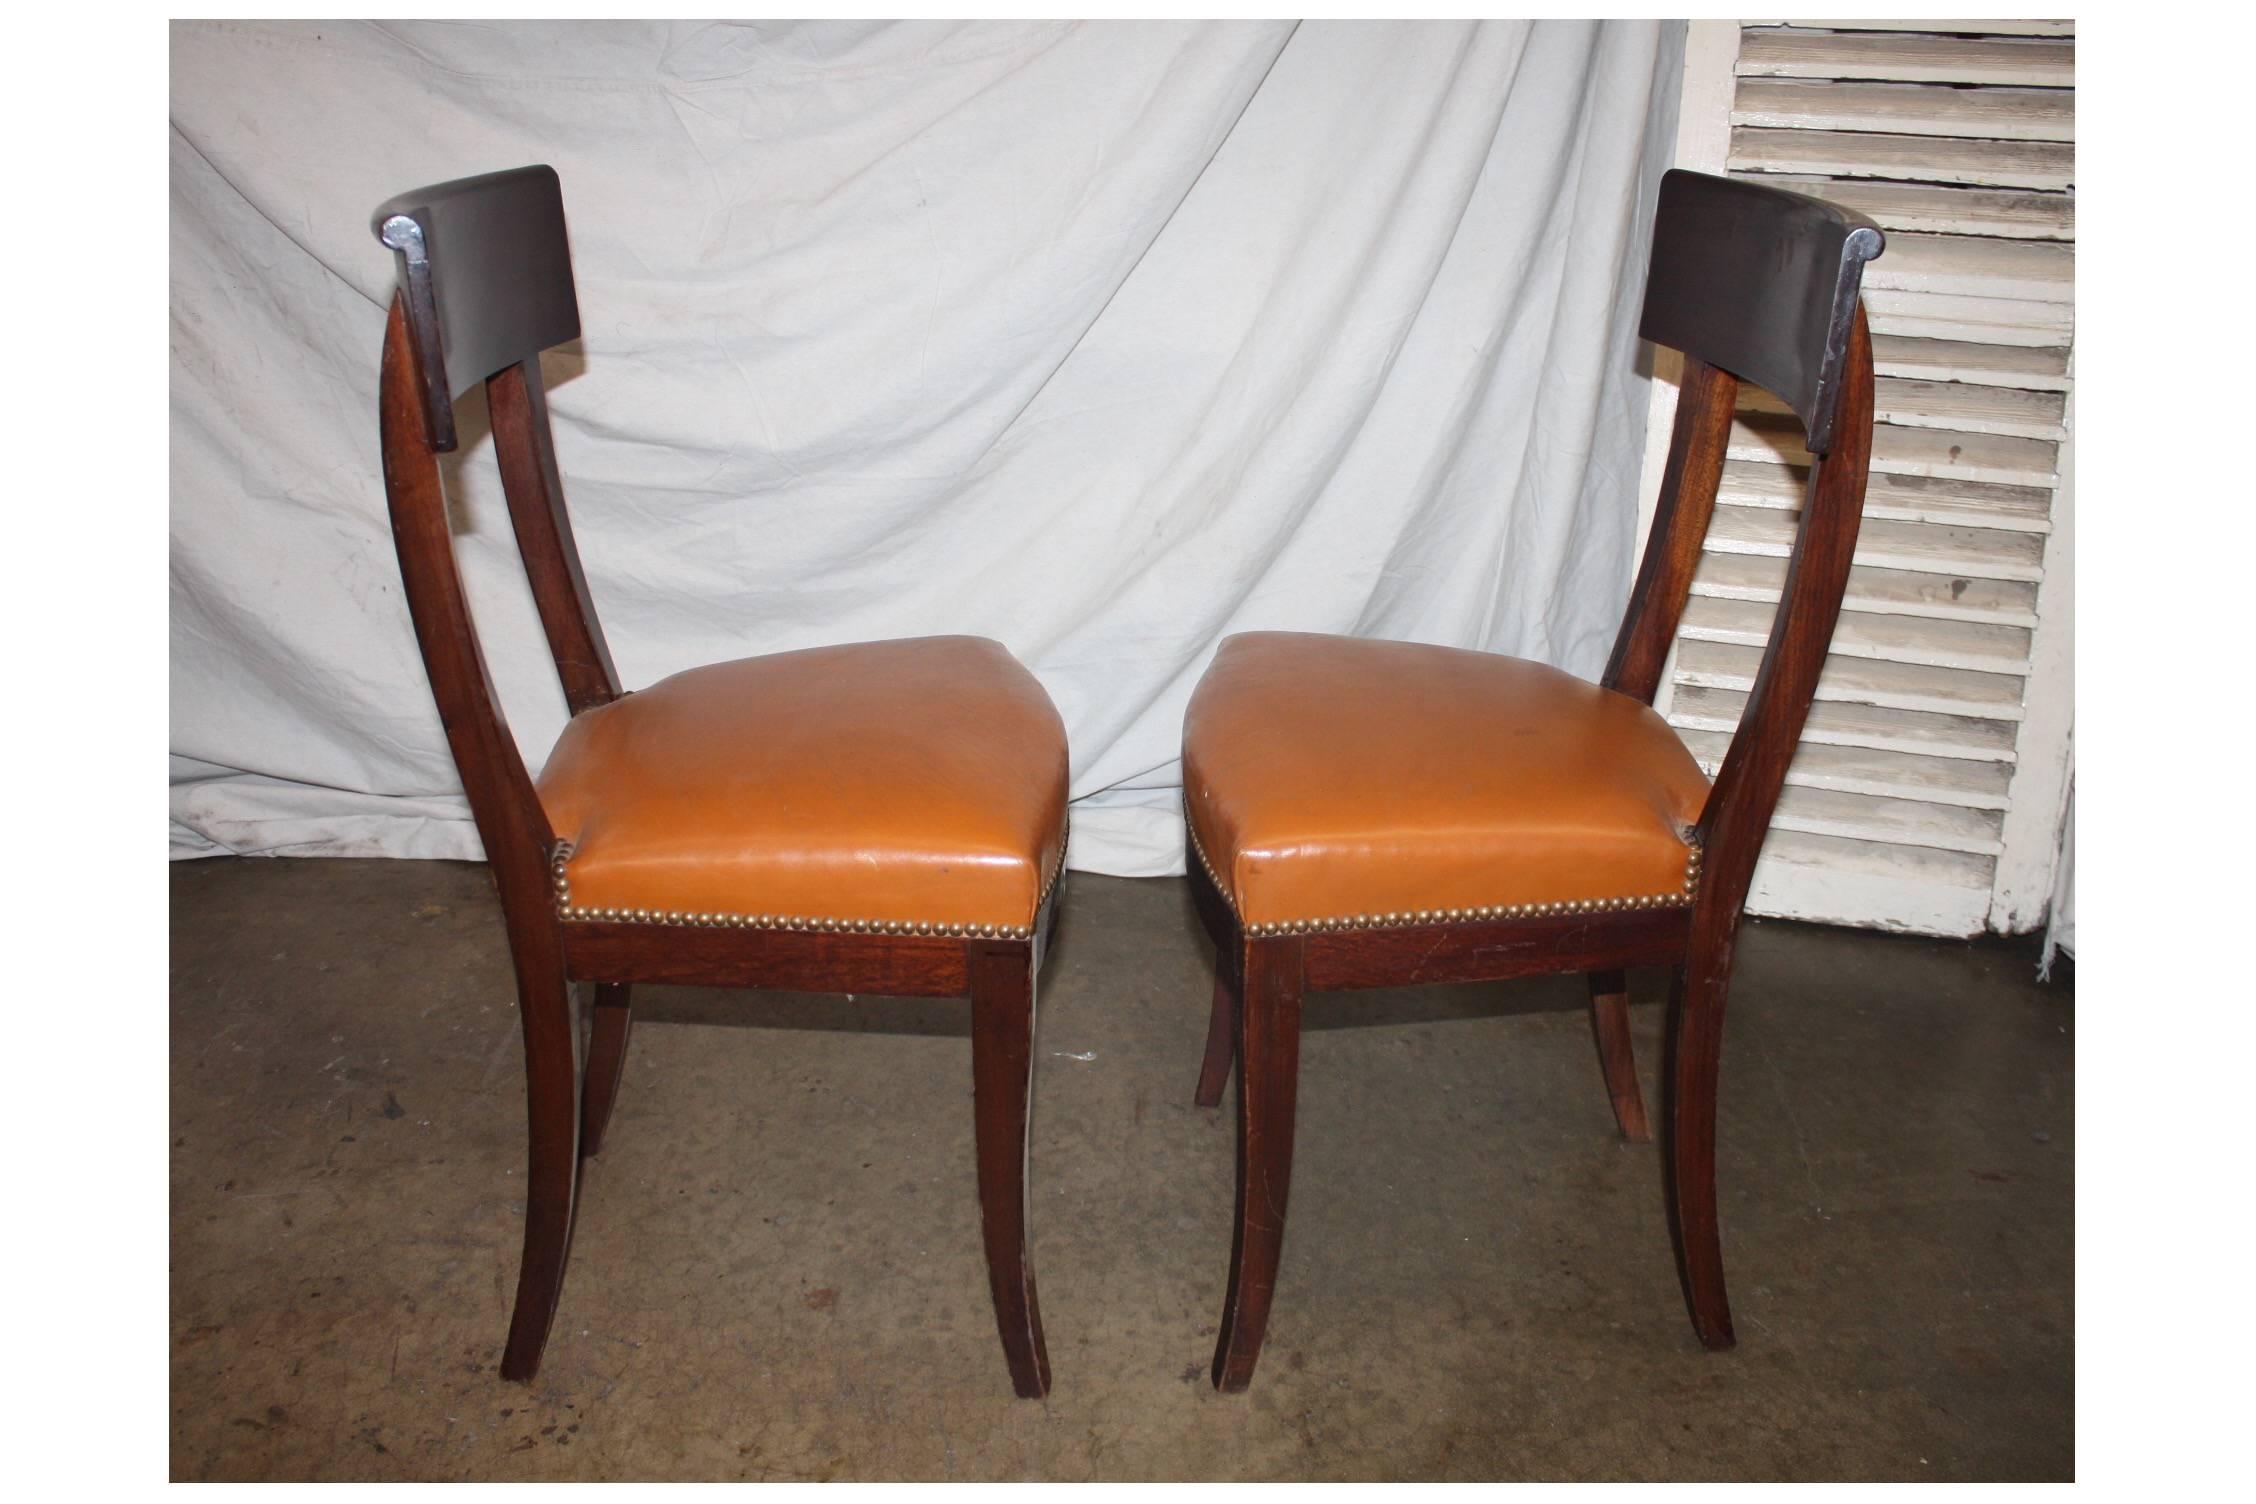 20th Century Beautiful Set of French Directoire Chairs